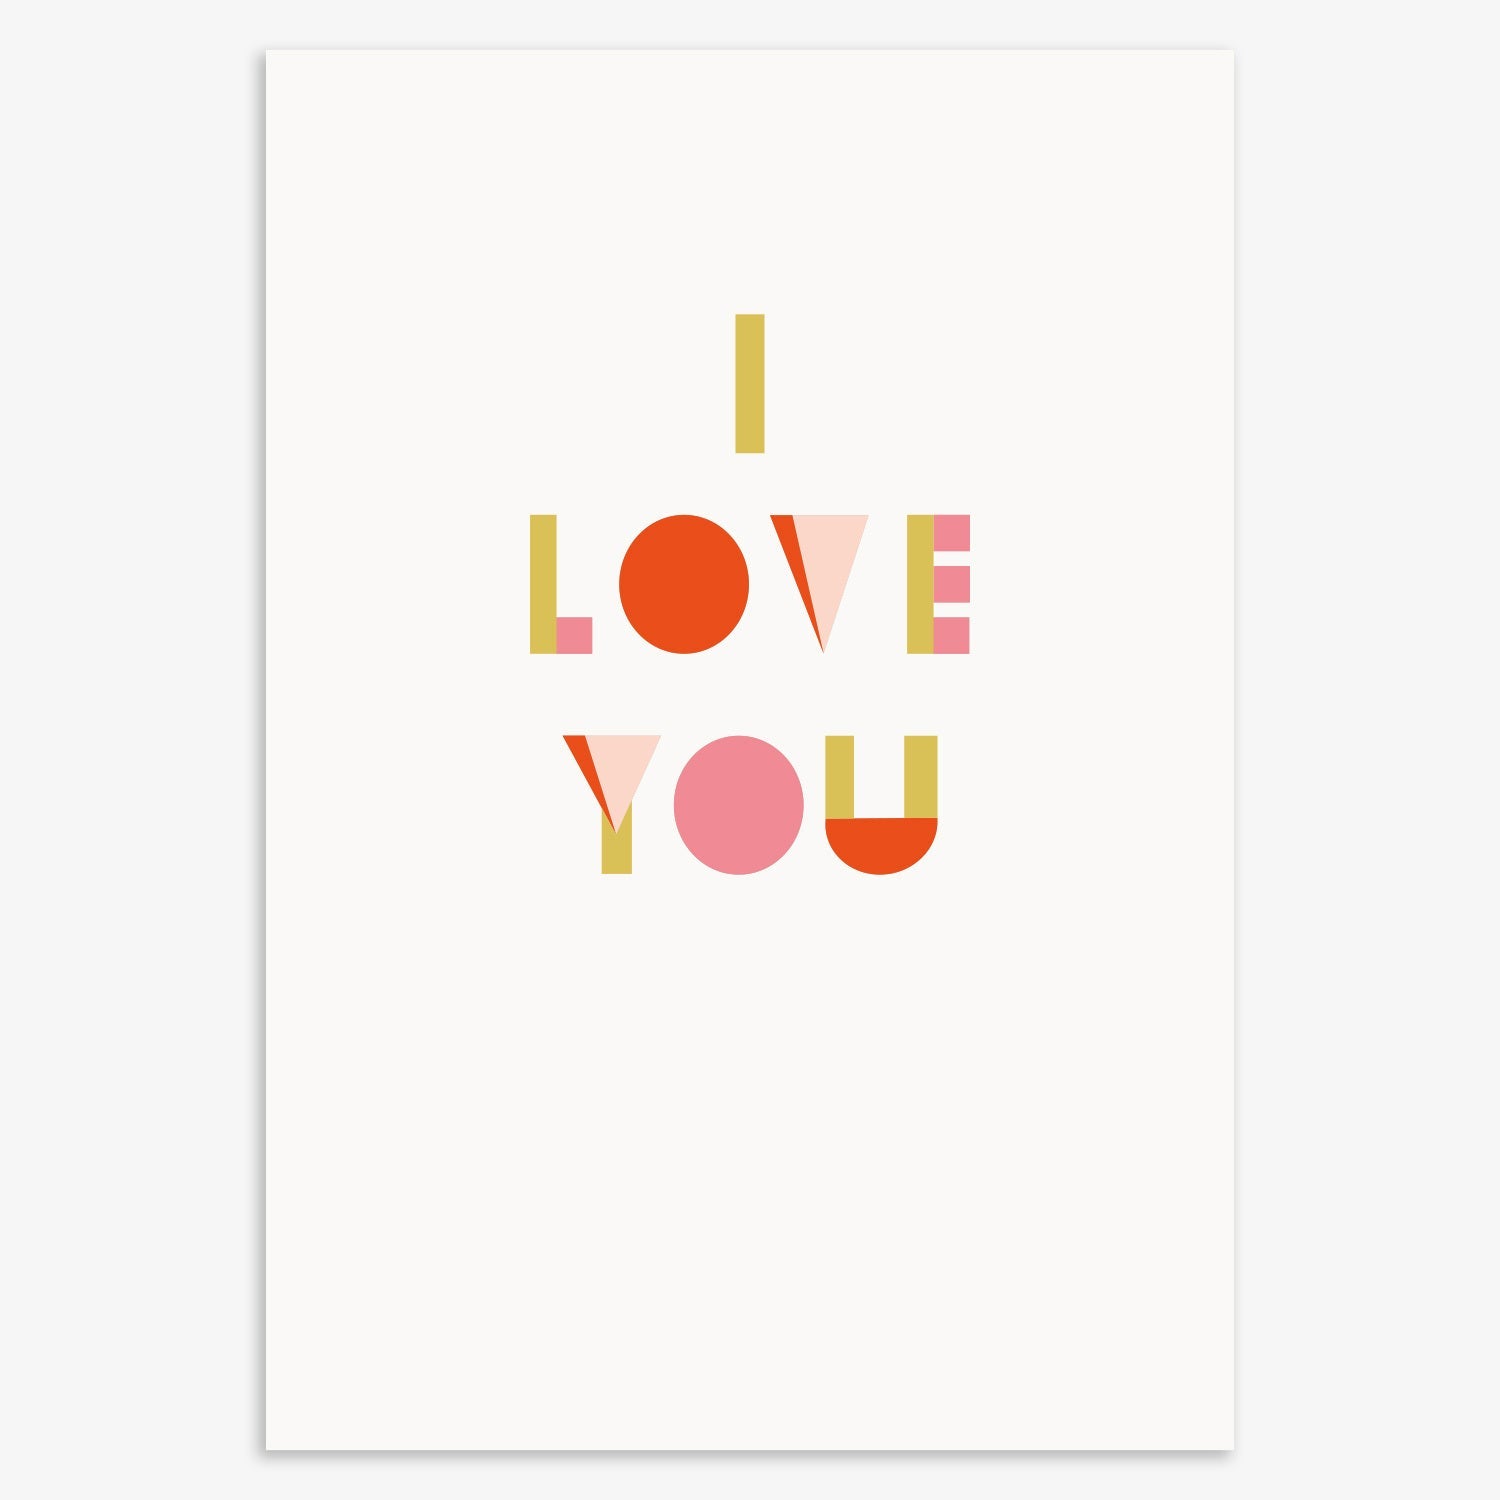 "I Love You" - Colour Block Letters Note Card